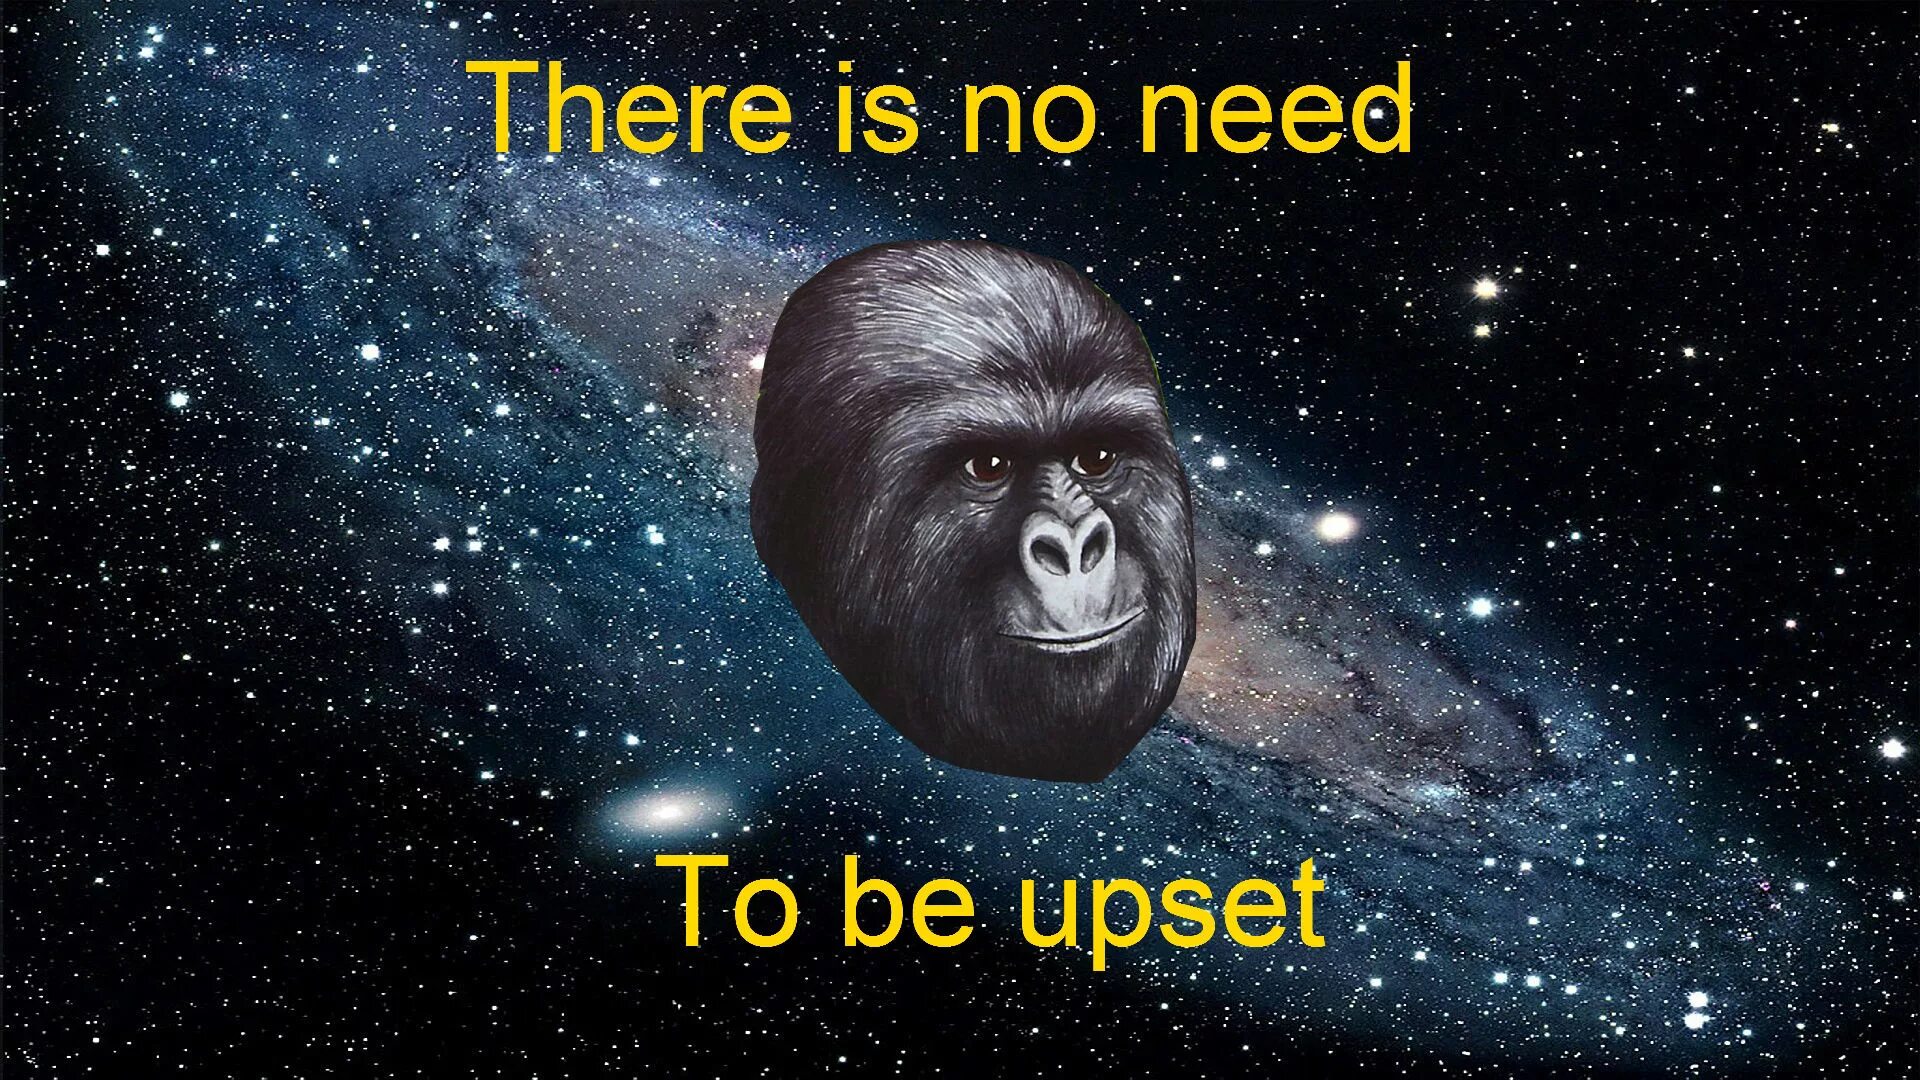 I am really in need a. There is no need to be upset. There is no need. To be upset. There is no need to be upset meme.